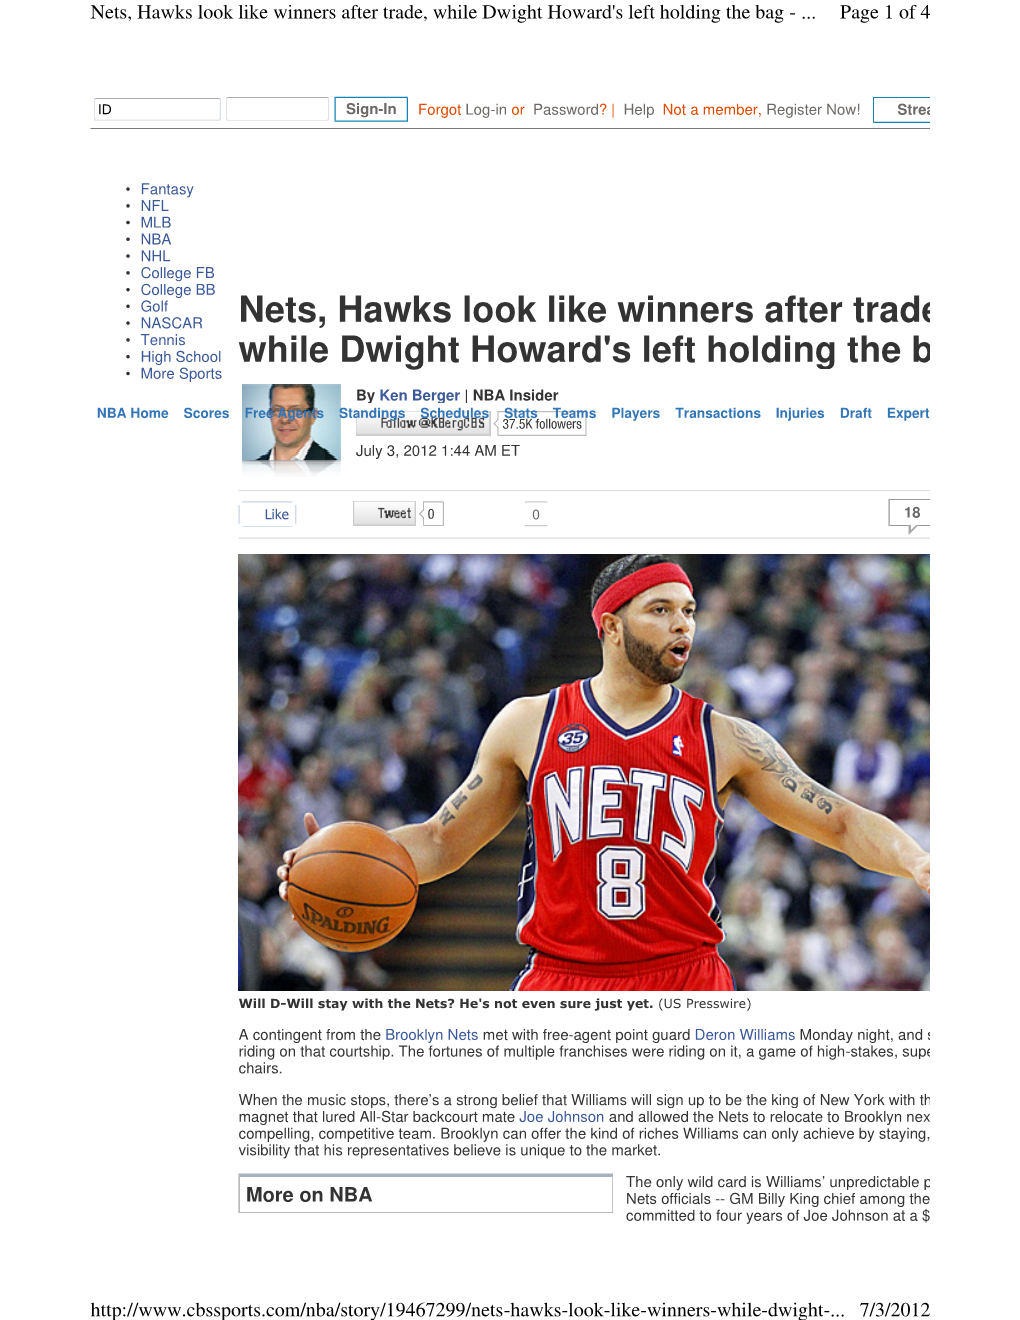 Nets, Hawks Look Like Winners After Trade, While Dwight Howard's Left Holding the Bag -